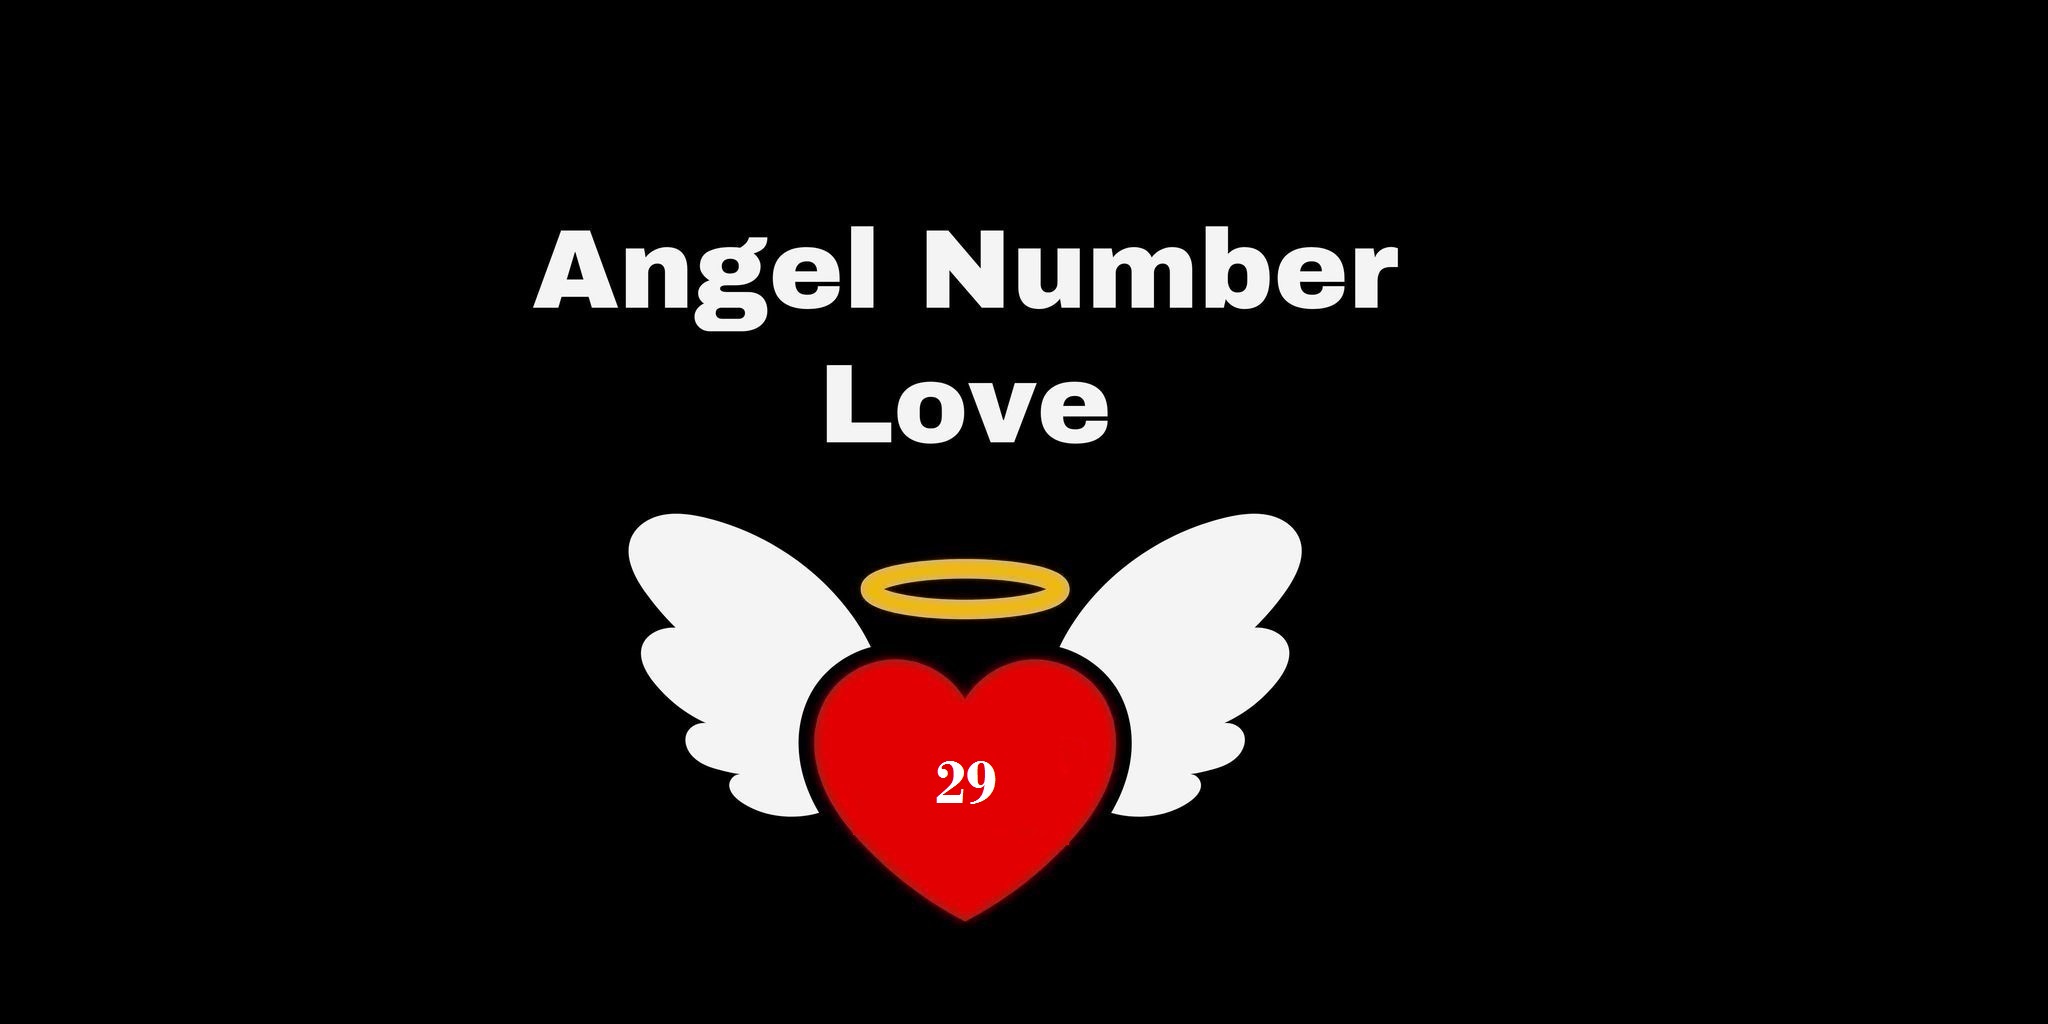 29 Angel Number Meaning In Love